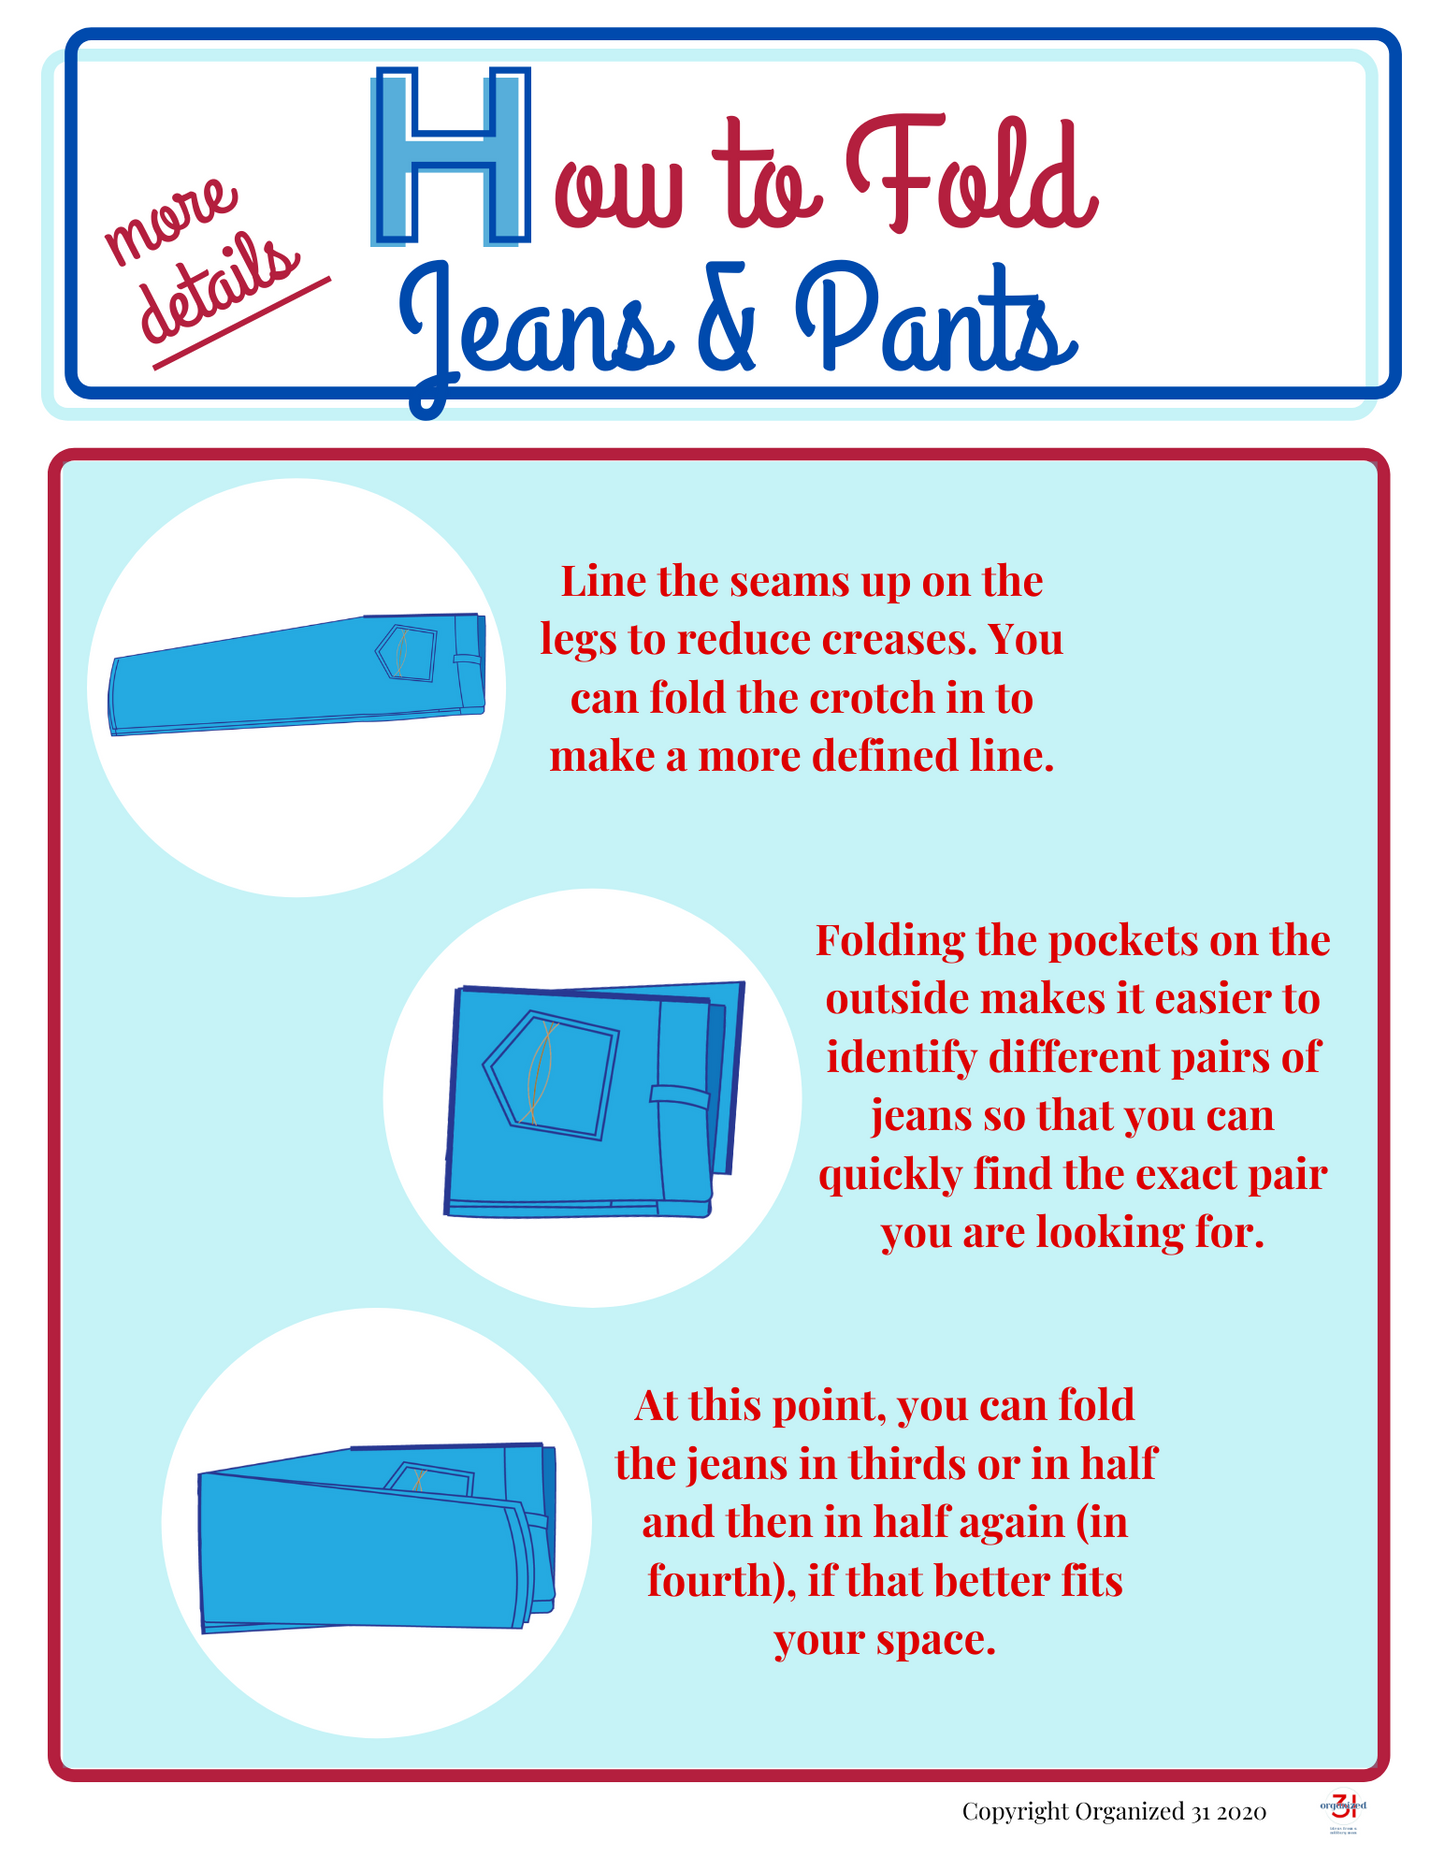 How to Fold Clothes